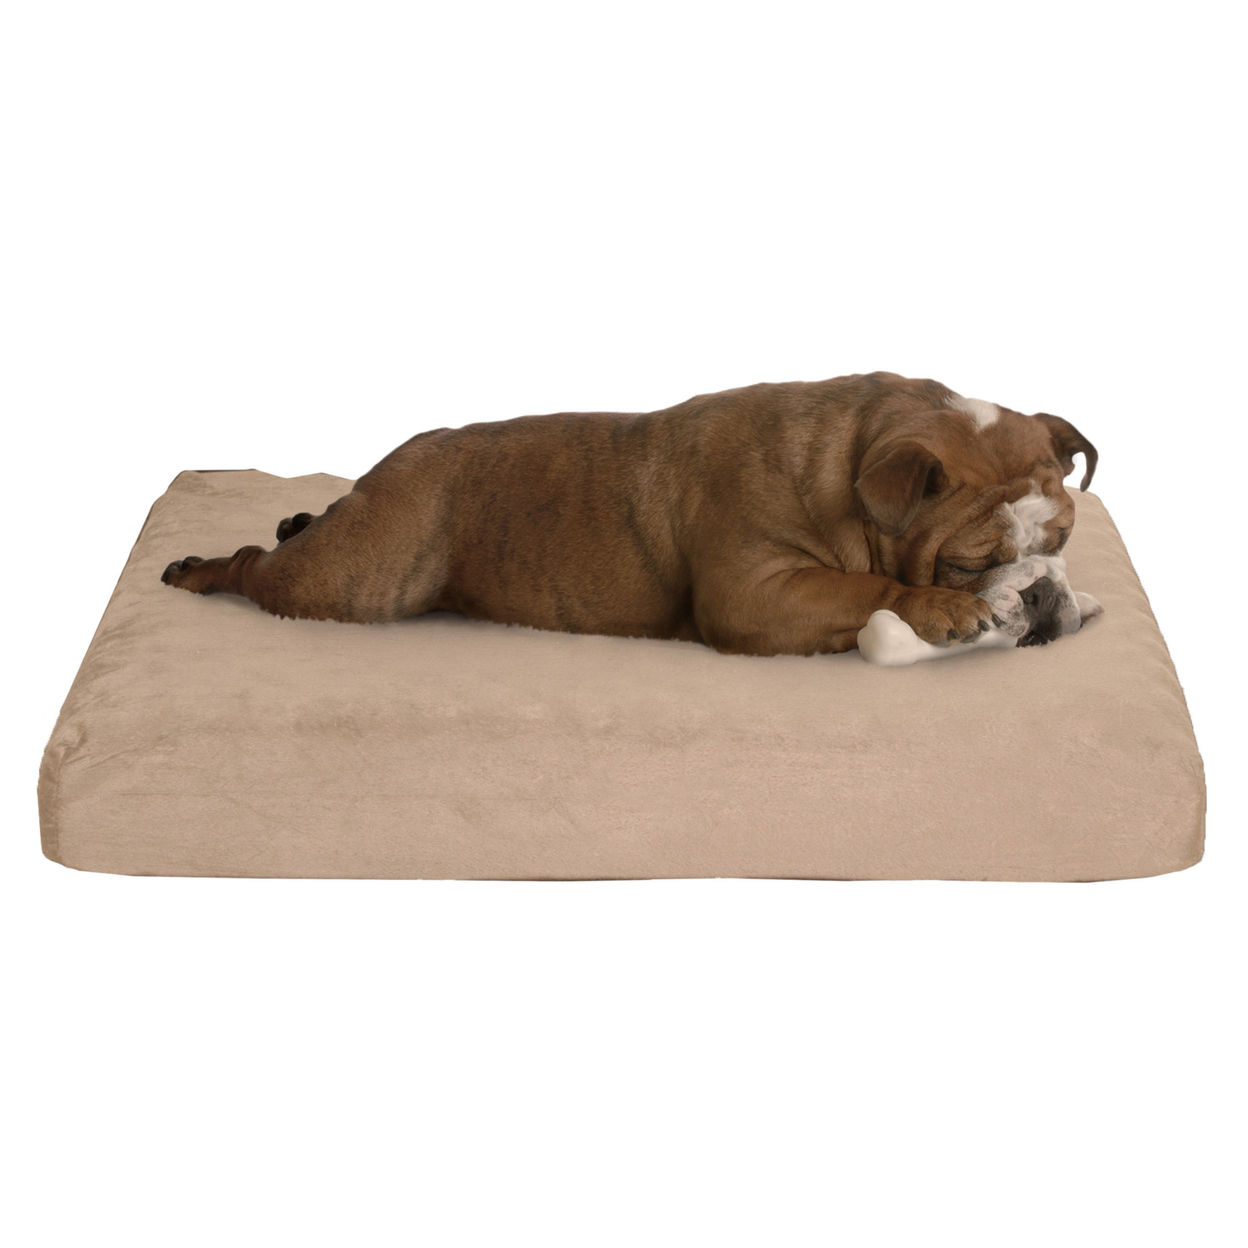 Memory Foam Dog Bed 2-Layer Orthopedic Pet Pad 26x19 Pet Bed Dogs Up To 40lbs